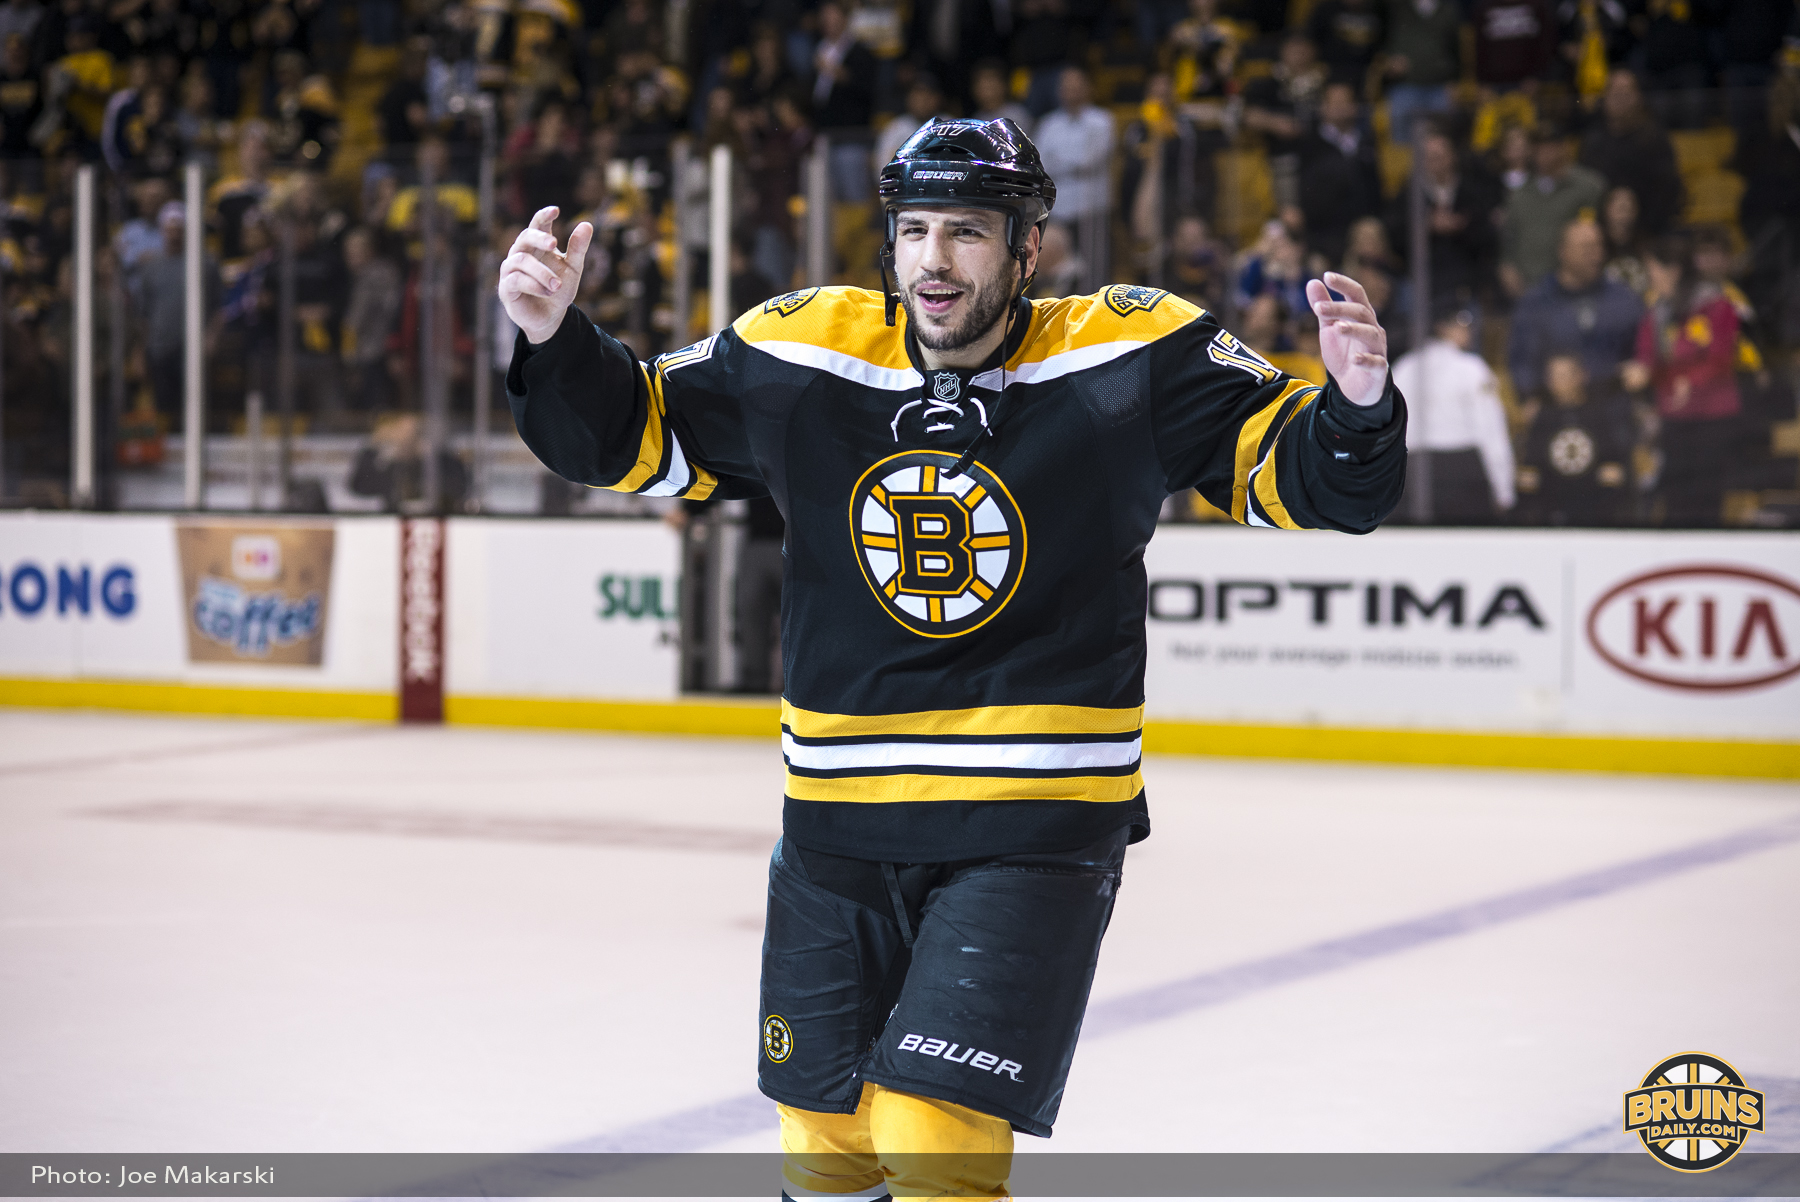 Milan Lucic makes his long awaited return to TD Garden since being traded to the Kings in the off-season. (Photo by Joe Makarski, Bruins Daily)